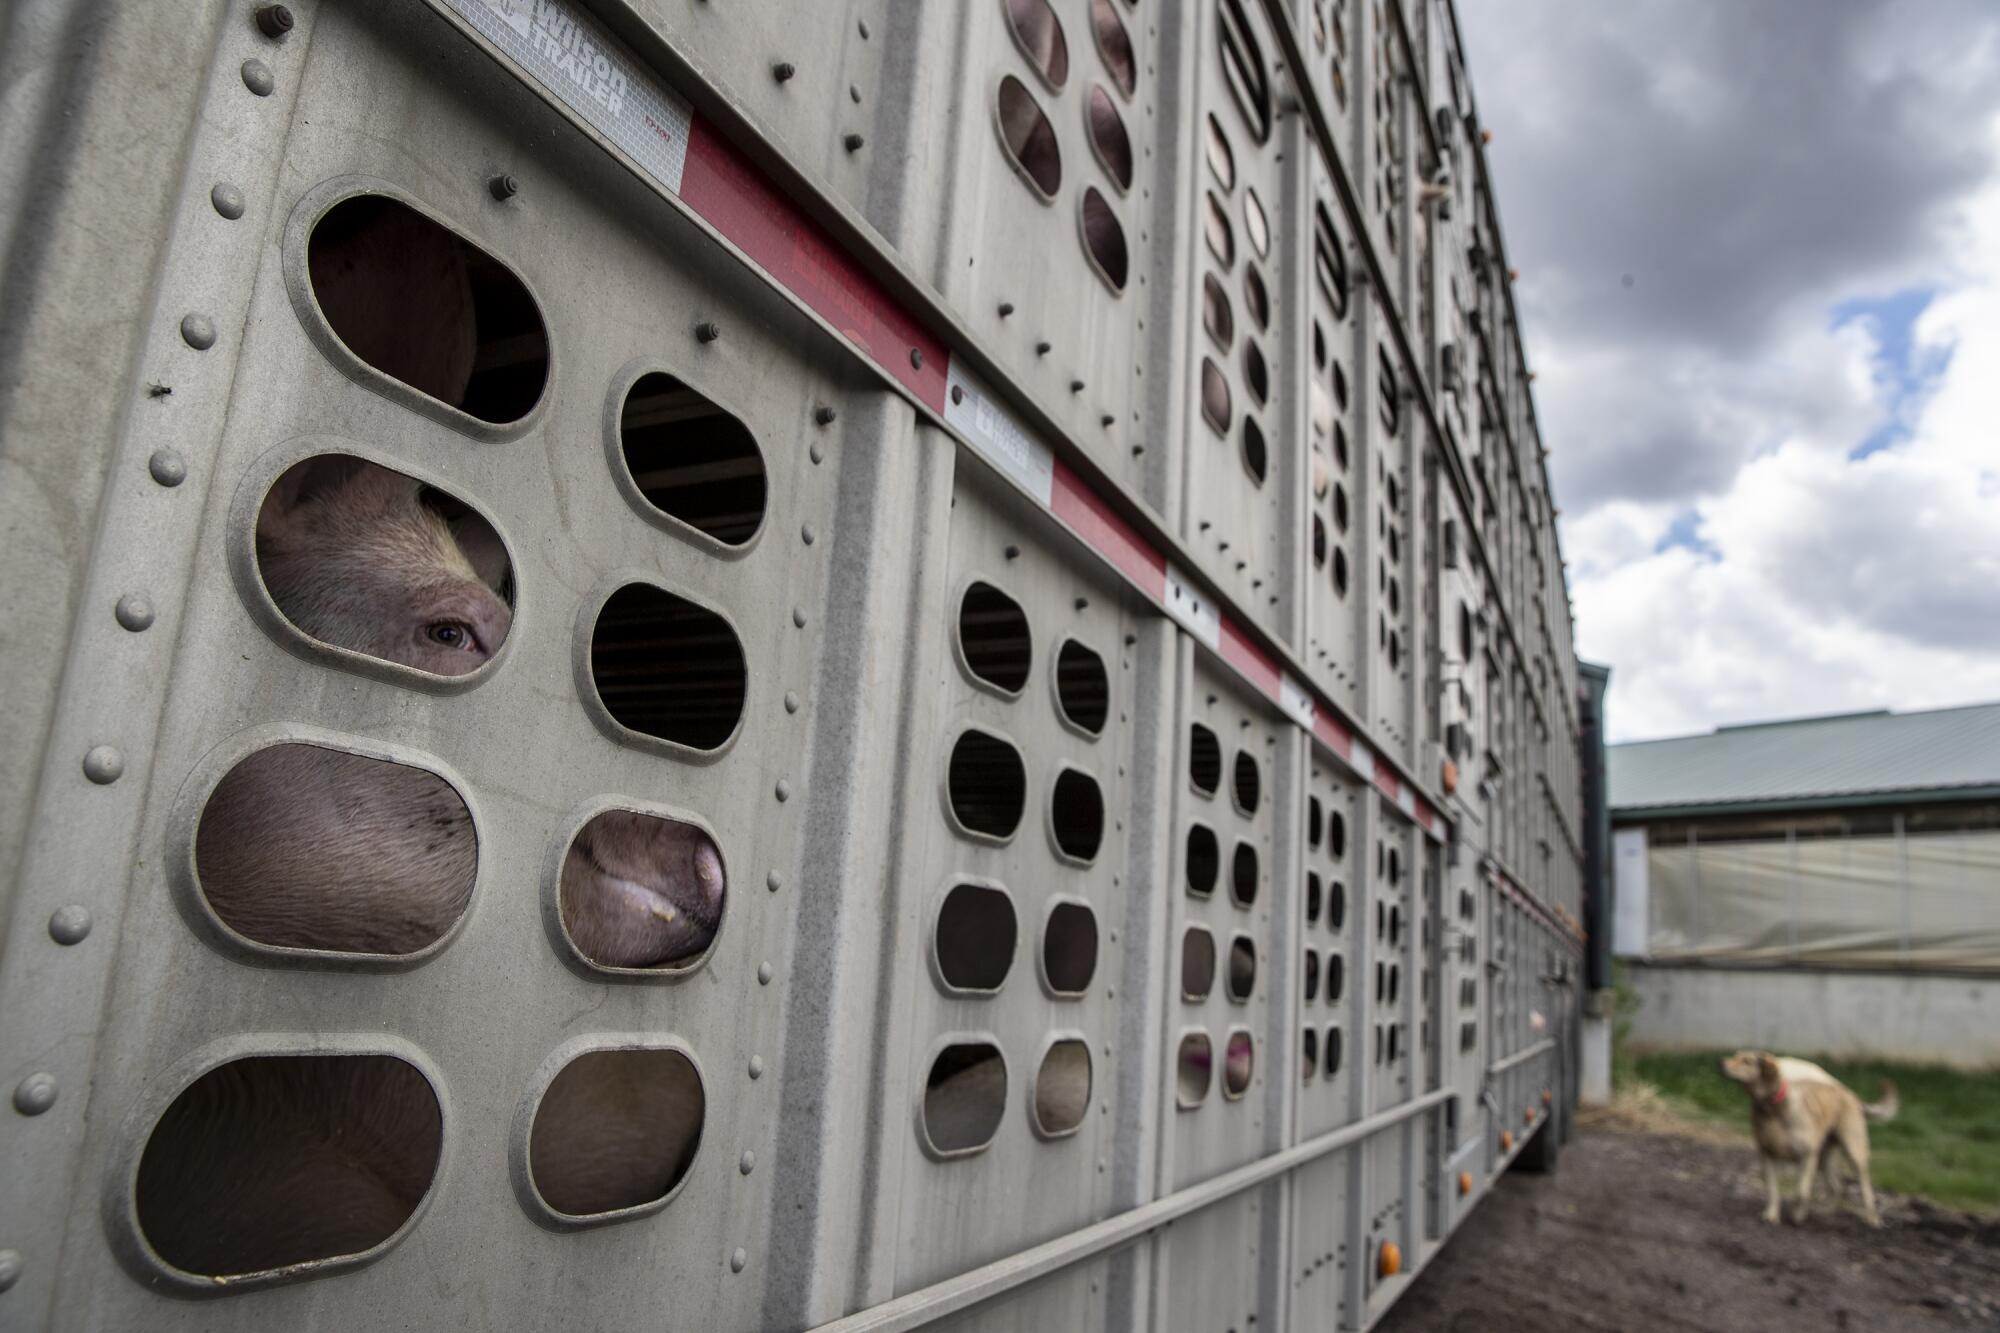 Pigs from the Anderson family farm are still loaded these days for meatpacking plants